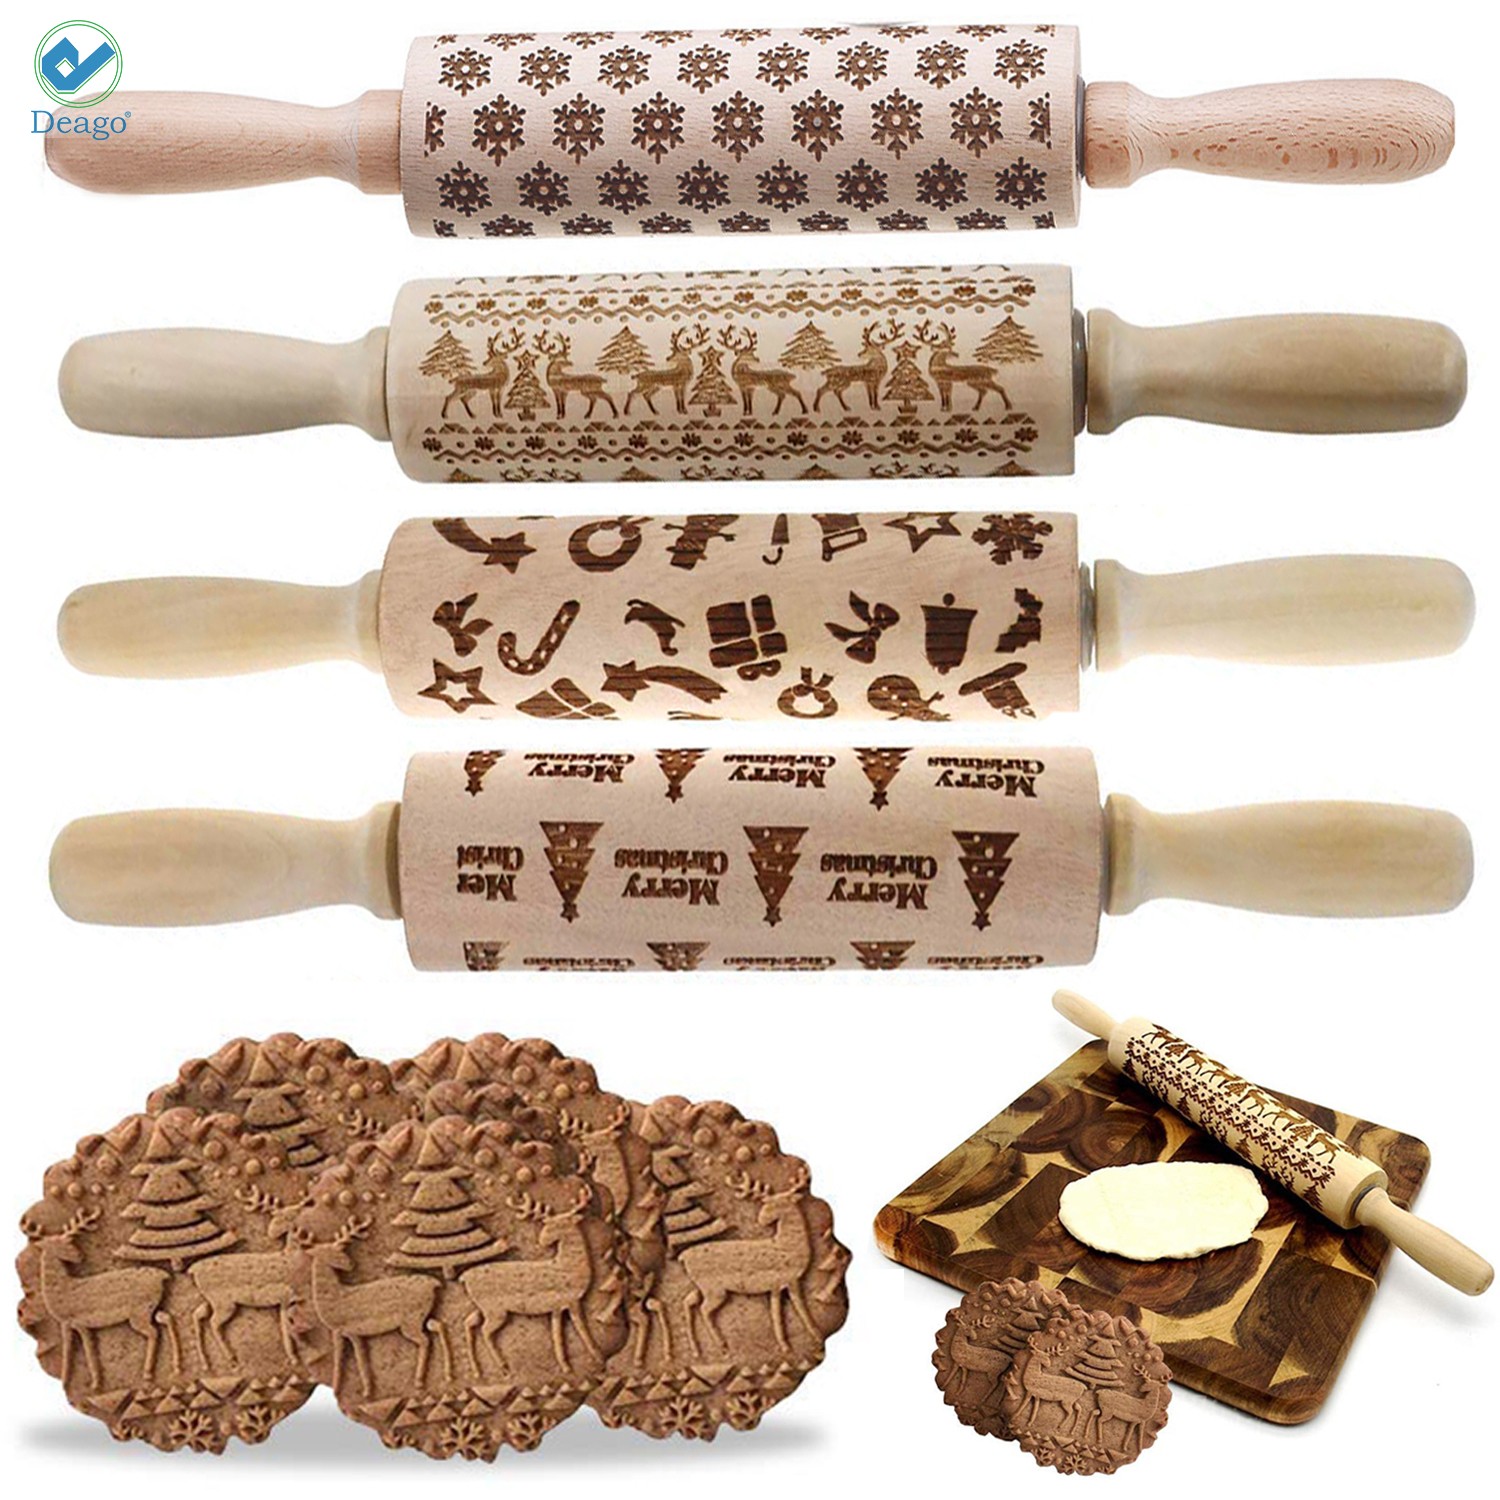 Deago 17" 3D Christmas Wooden Rolling Pin Embossing Roller Pins with Christmas Pattern for Cookies Cake Baking Kitchen Tool - image 1 of 8